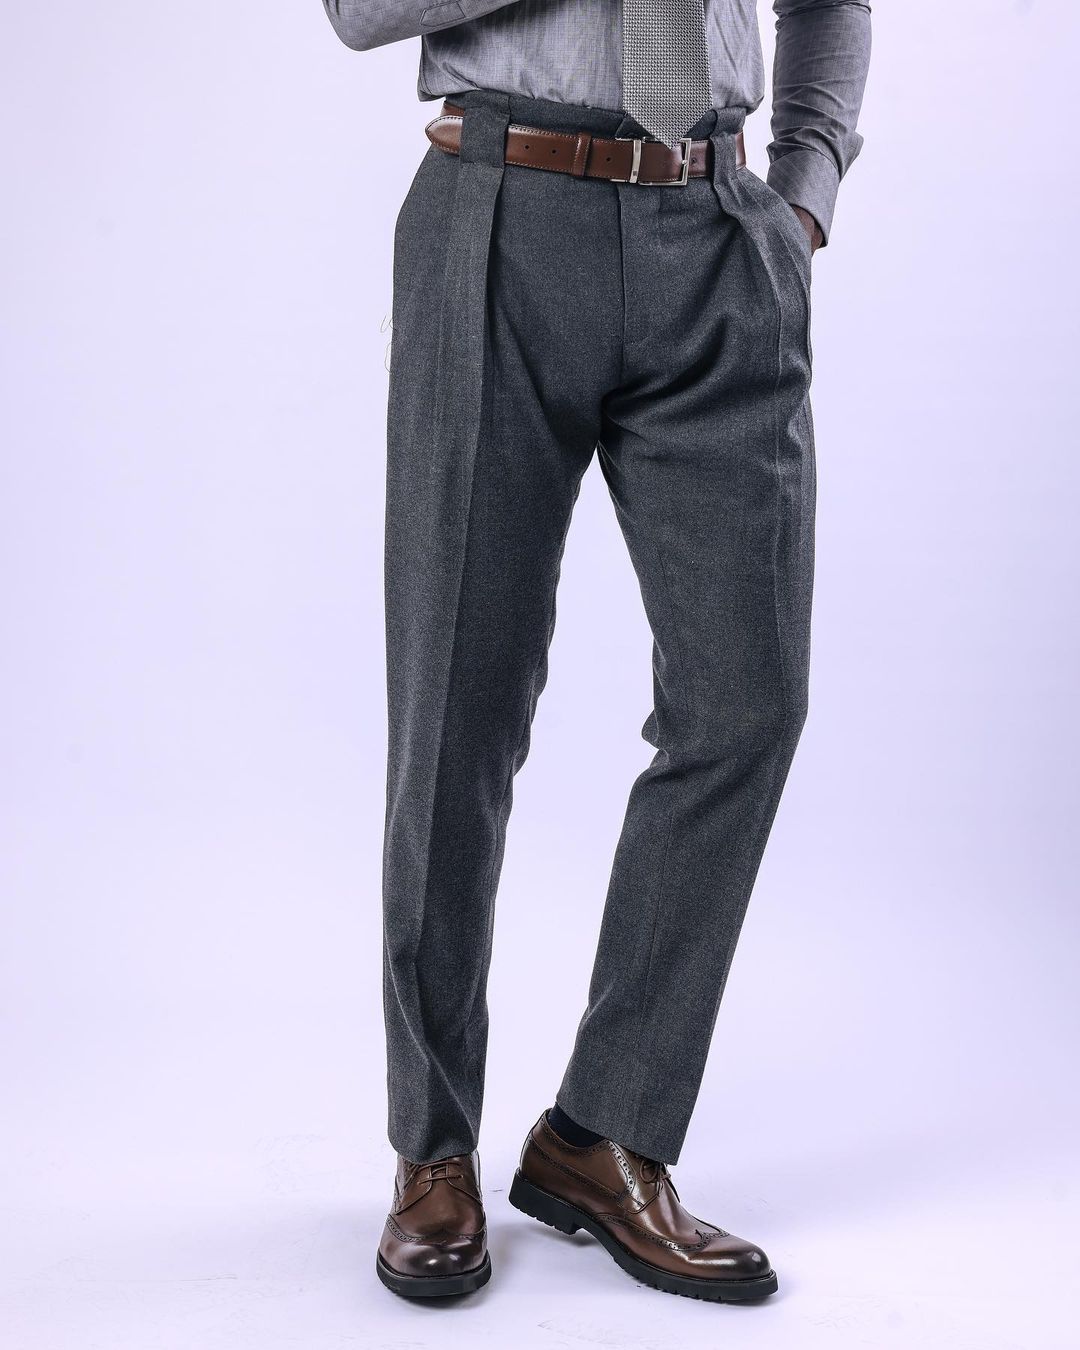 Light grey donegal tweed pleat Trousers